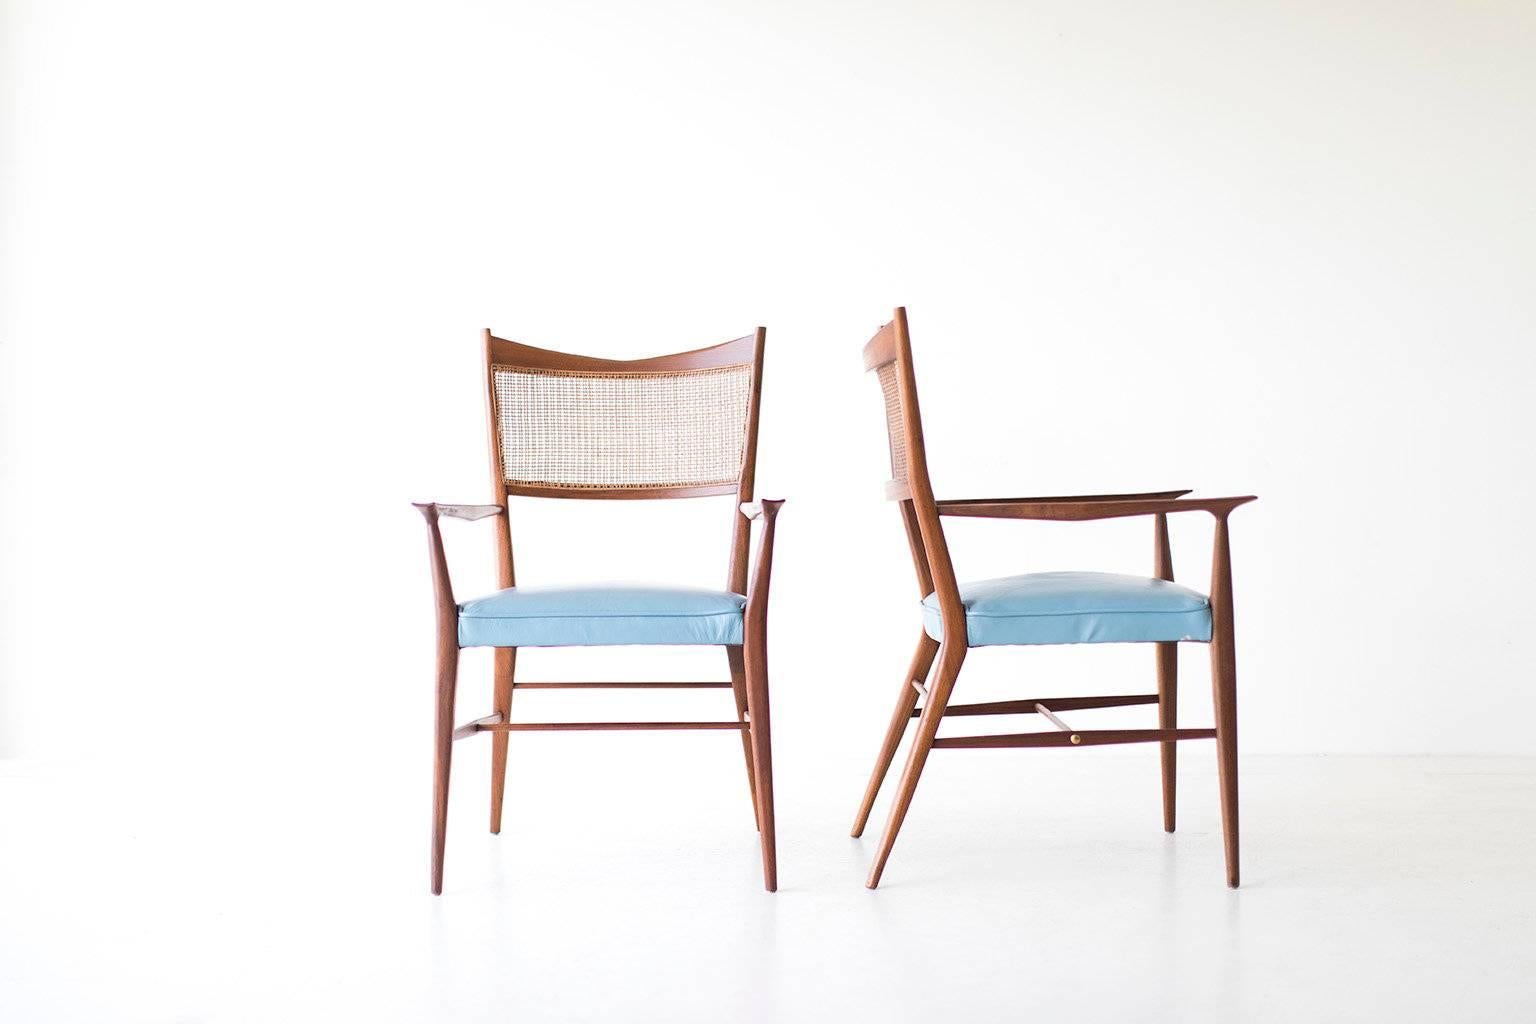 Designer: Paul McCobb. 

Manufacturer: H Sacks & Sons, Connoisseur Collection. 
Period or model: Mid-Century Modern. 
Specs: Walnut, Cane, Brass, Leather. 

Condition: 

These Paul McCobb dining chairs for H Sacks & Sons, Connoisseur